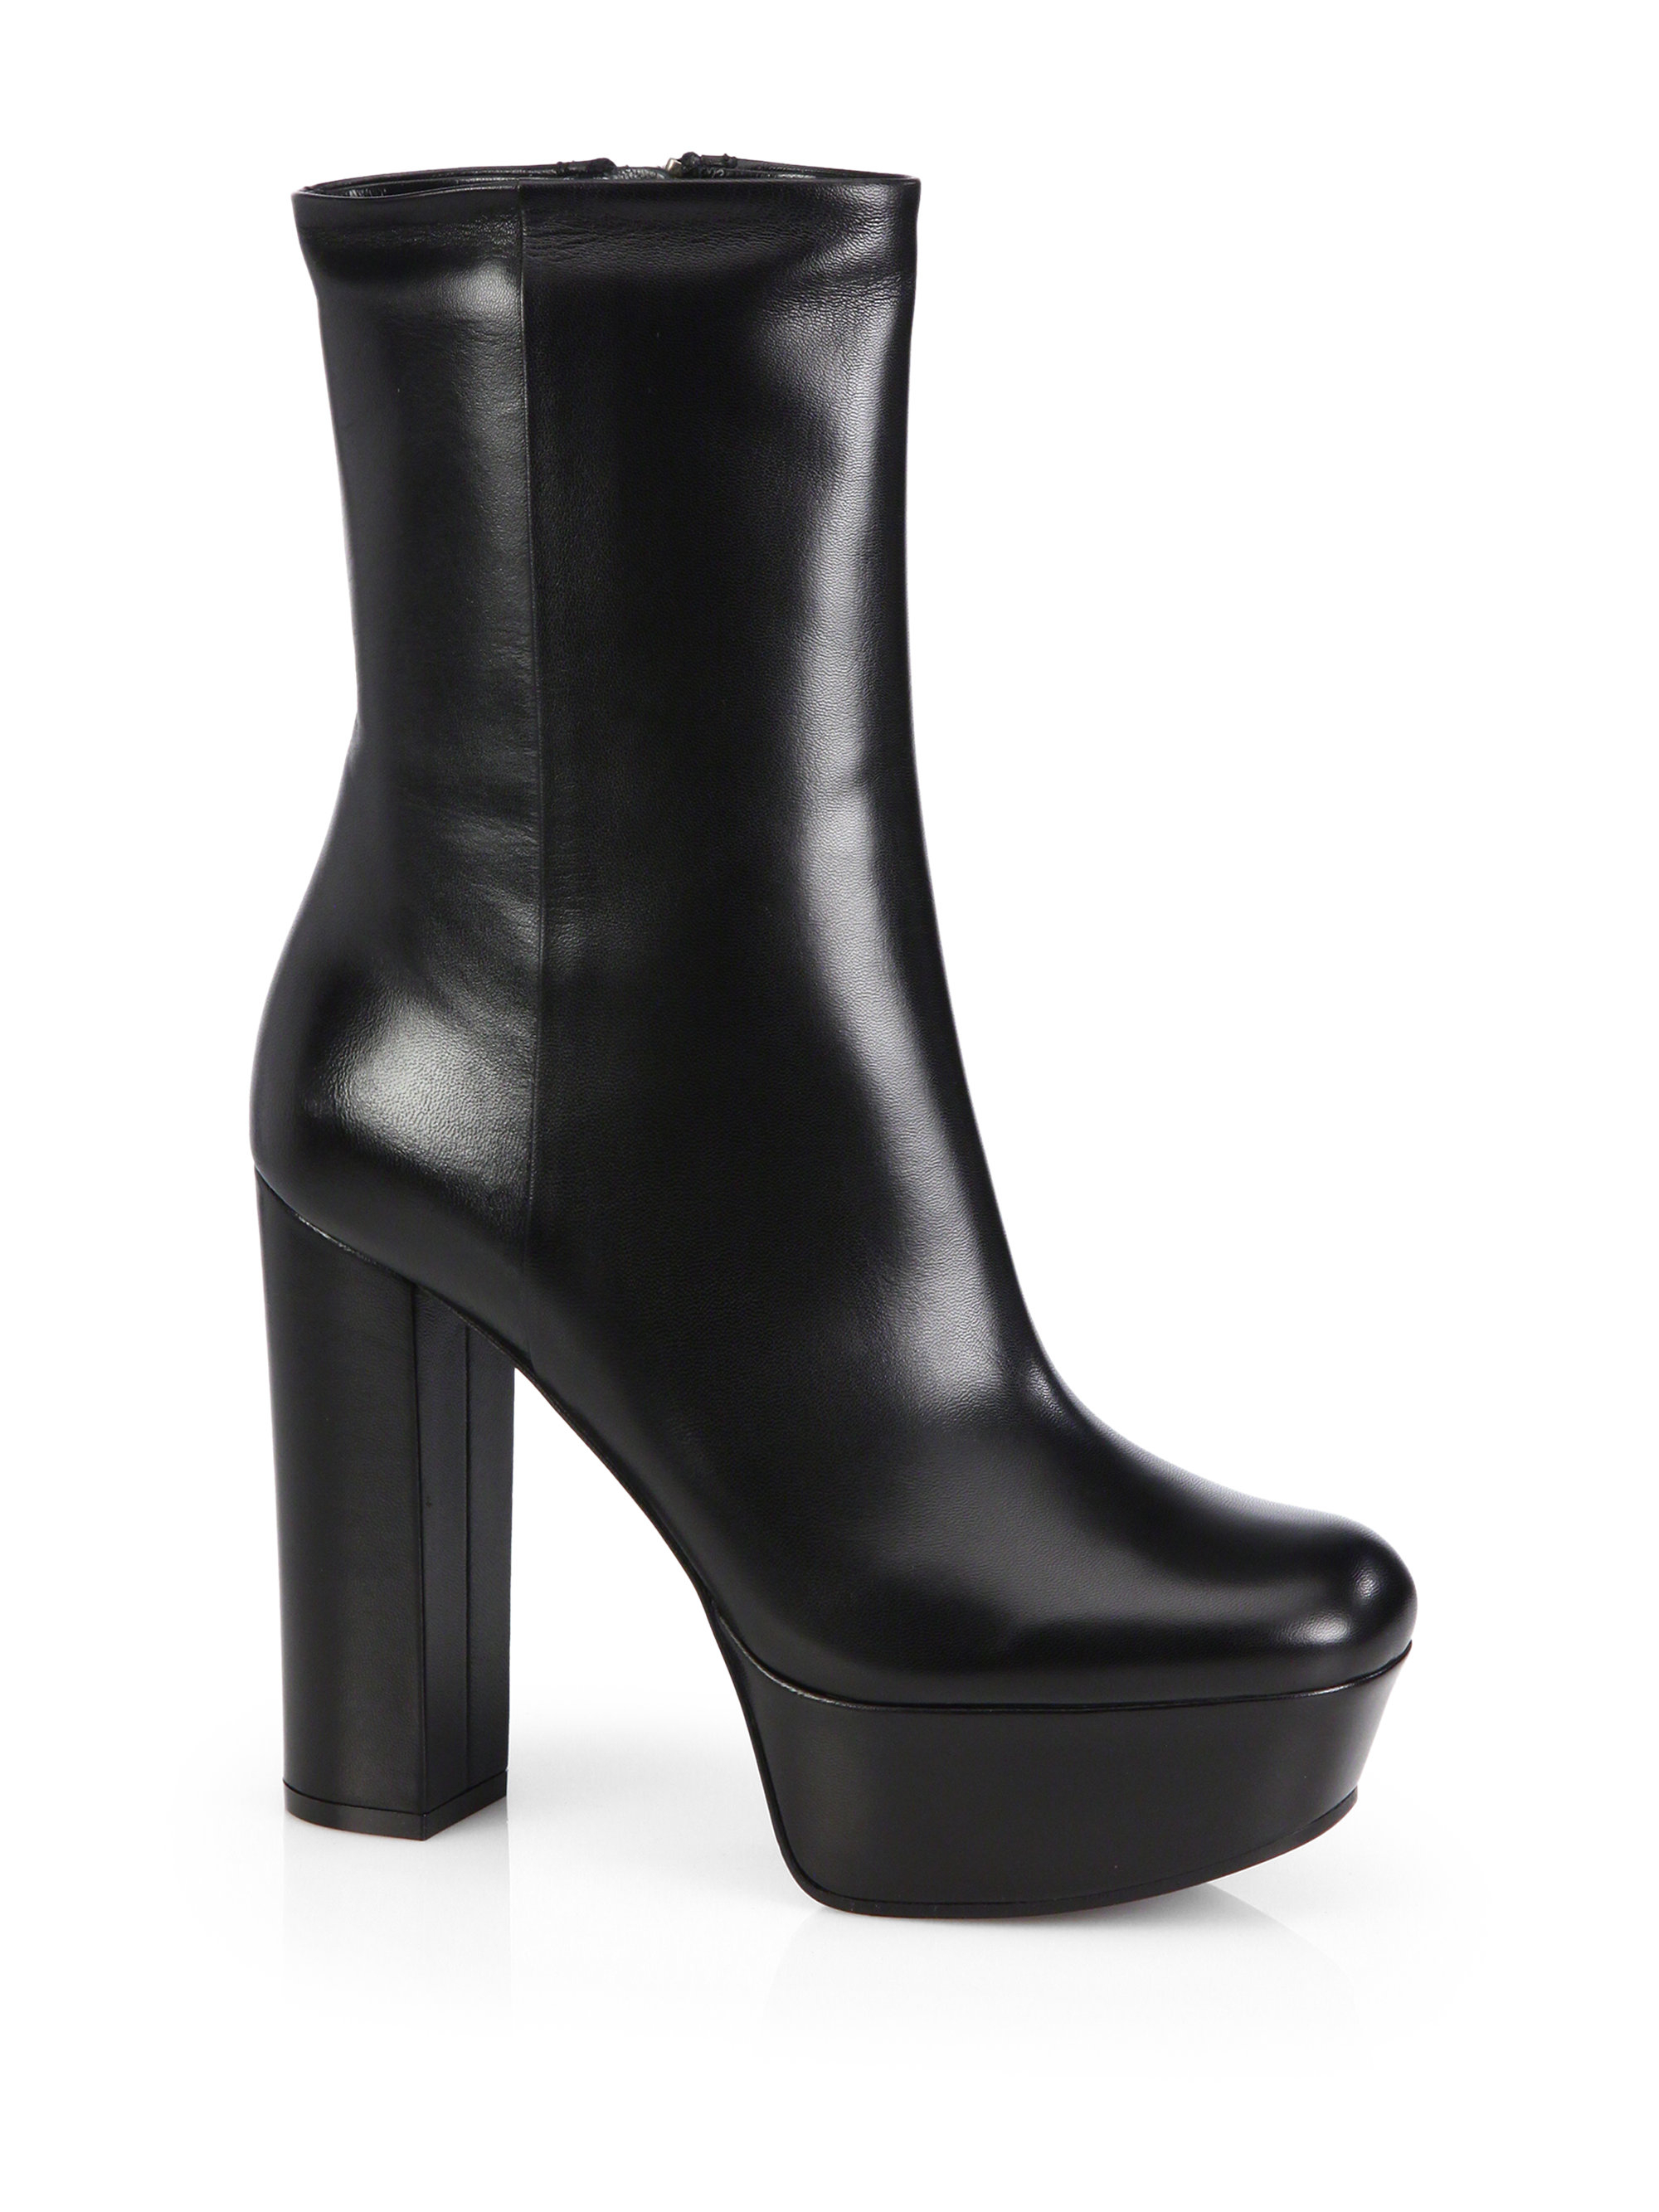 Gucci Leather Platform Ankle Boots in Black | Lyst